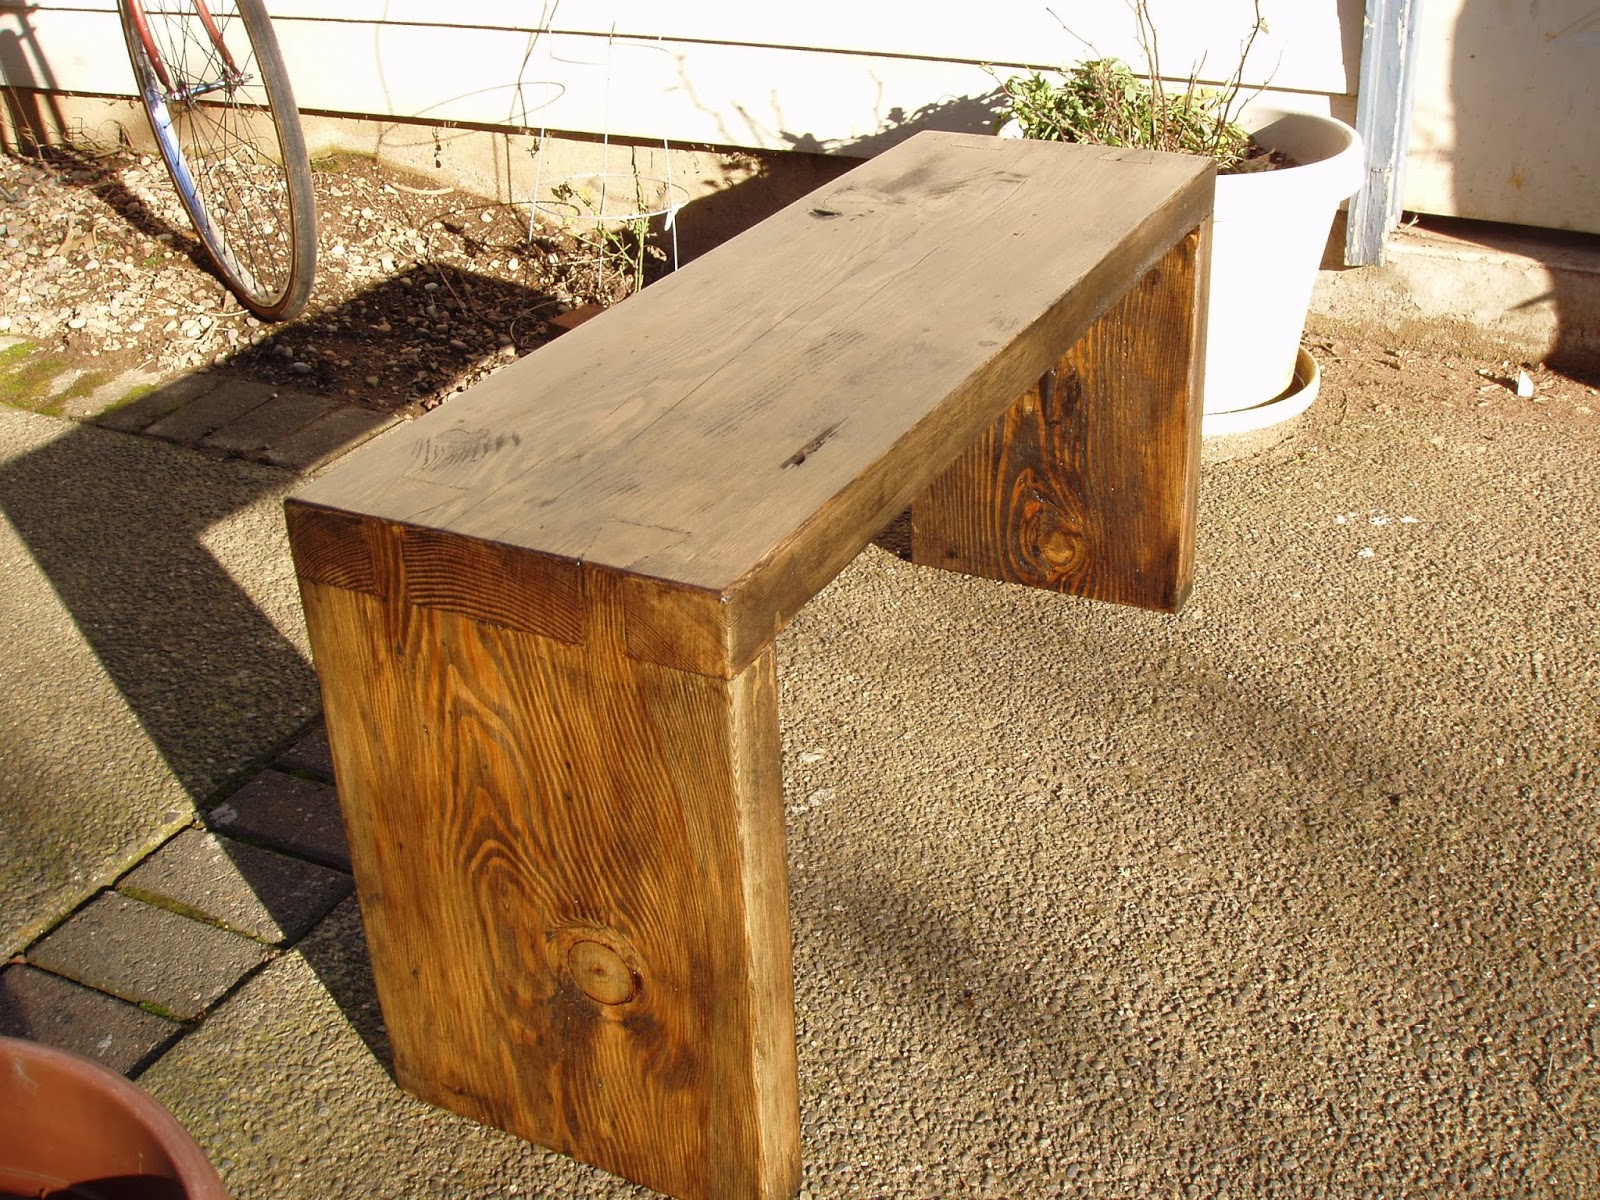 driftedge woodworking: Reclaimed Spruce Dovetail Bench. $120.00